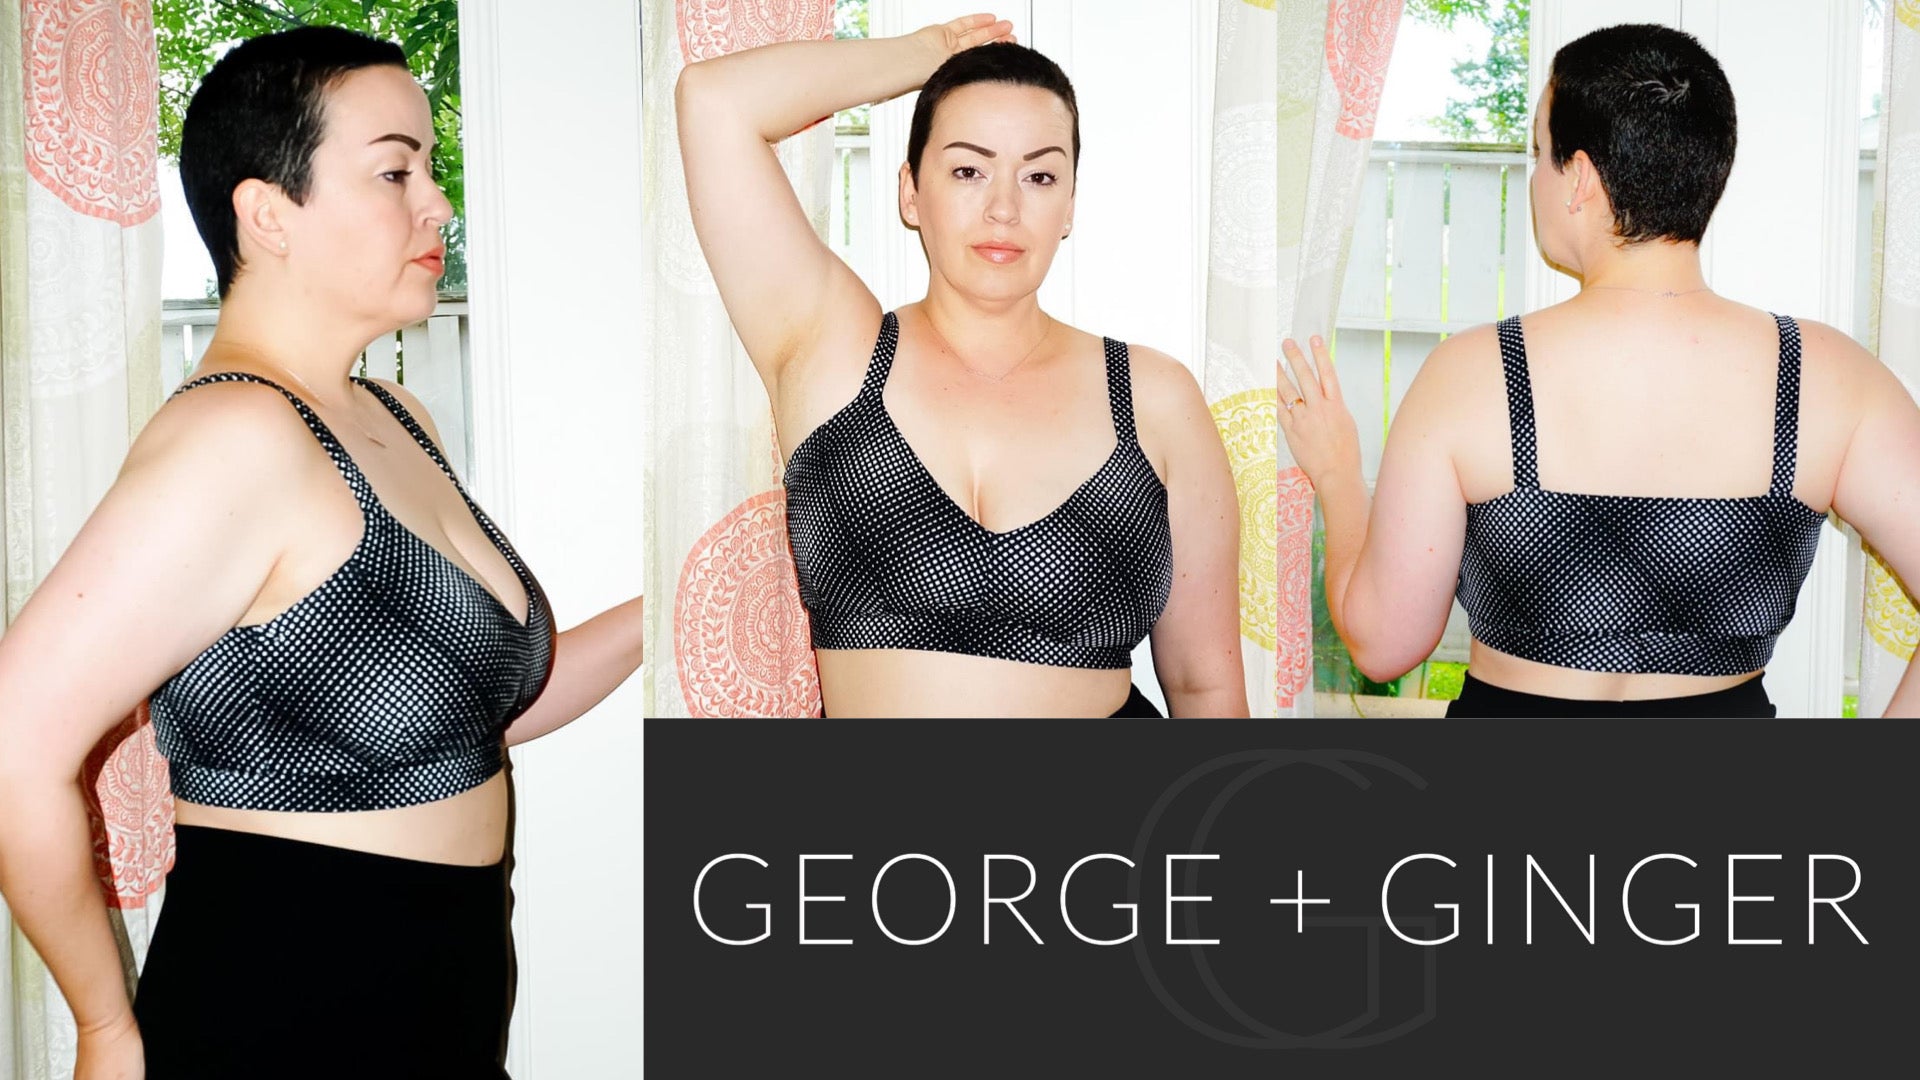 The 'Little Black Bra': Lingerie Designed To Emphasise The Beauty